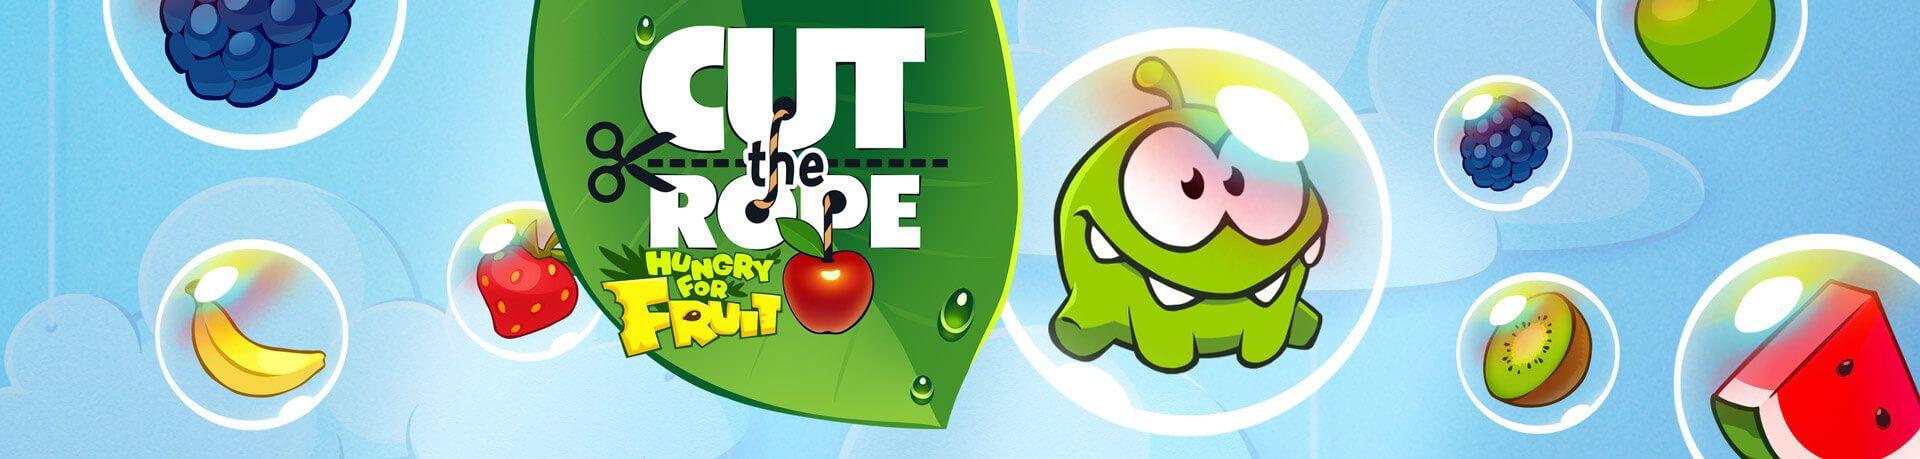 Cut the Rope Logo - Cut the Rope